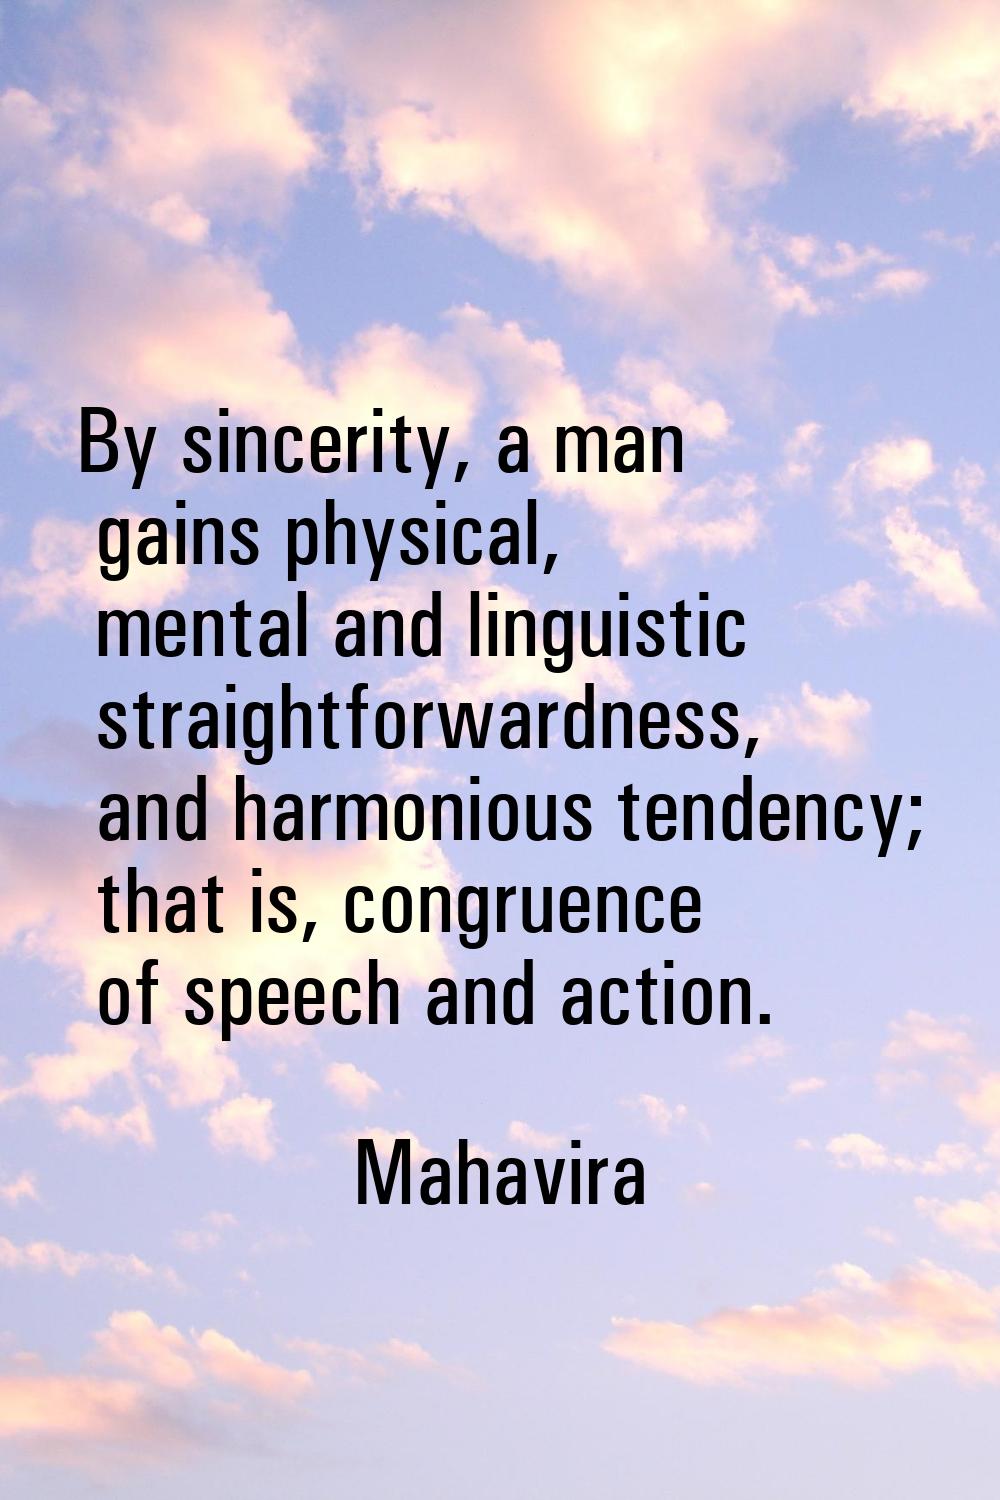 By sincerity, a man gains physical, mental and linguistic straightforwardness, and harmonious tende